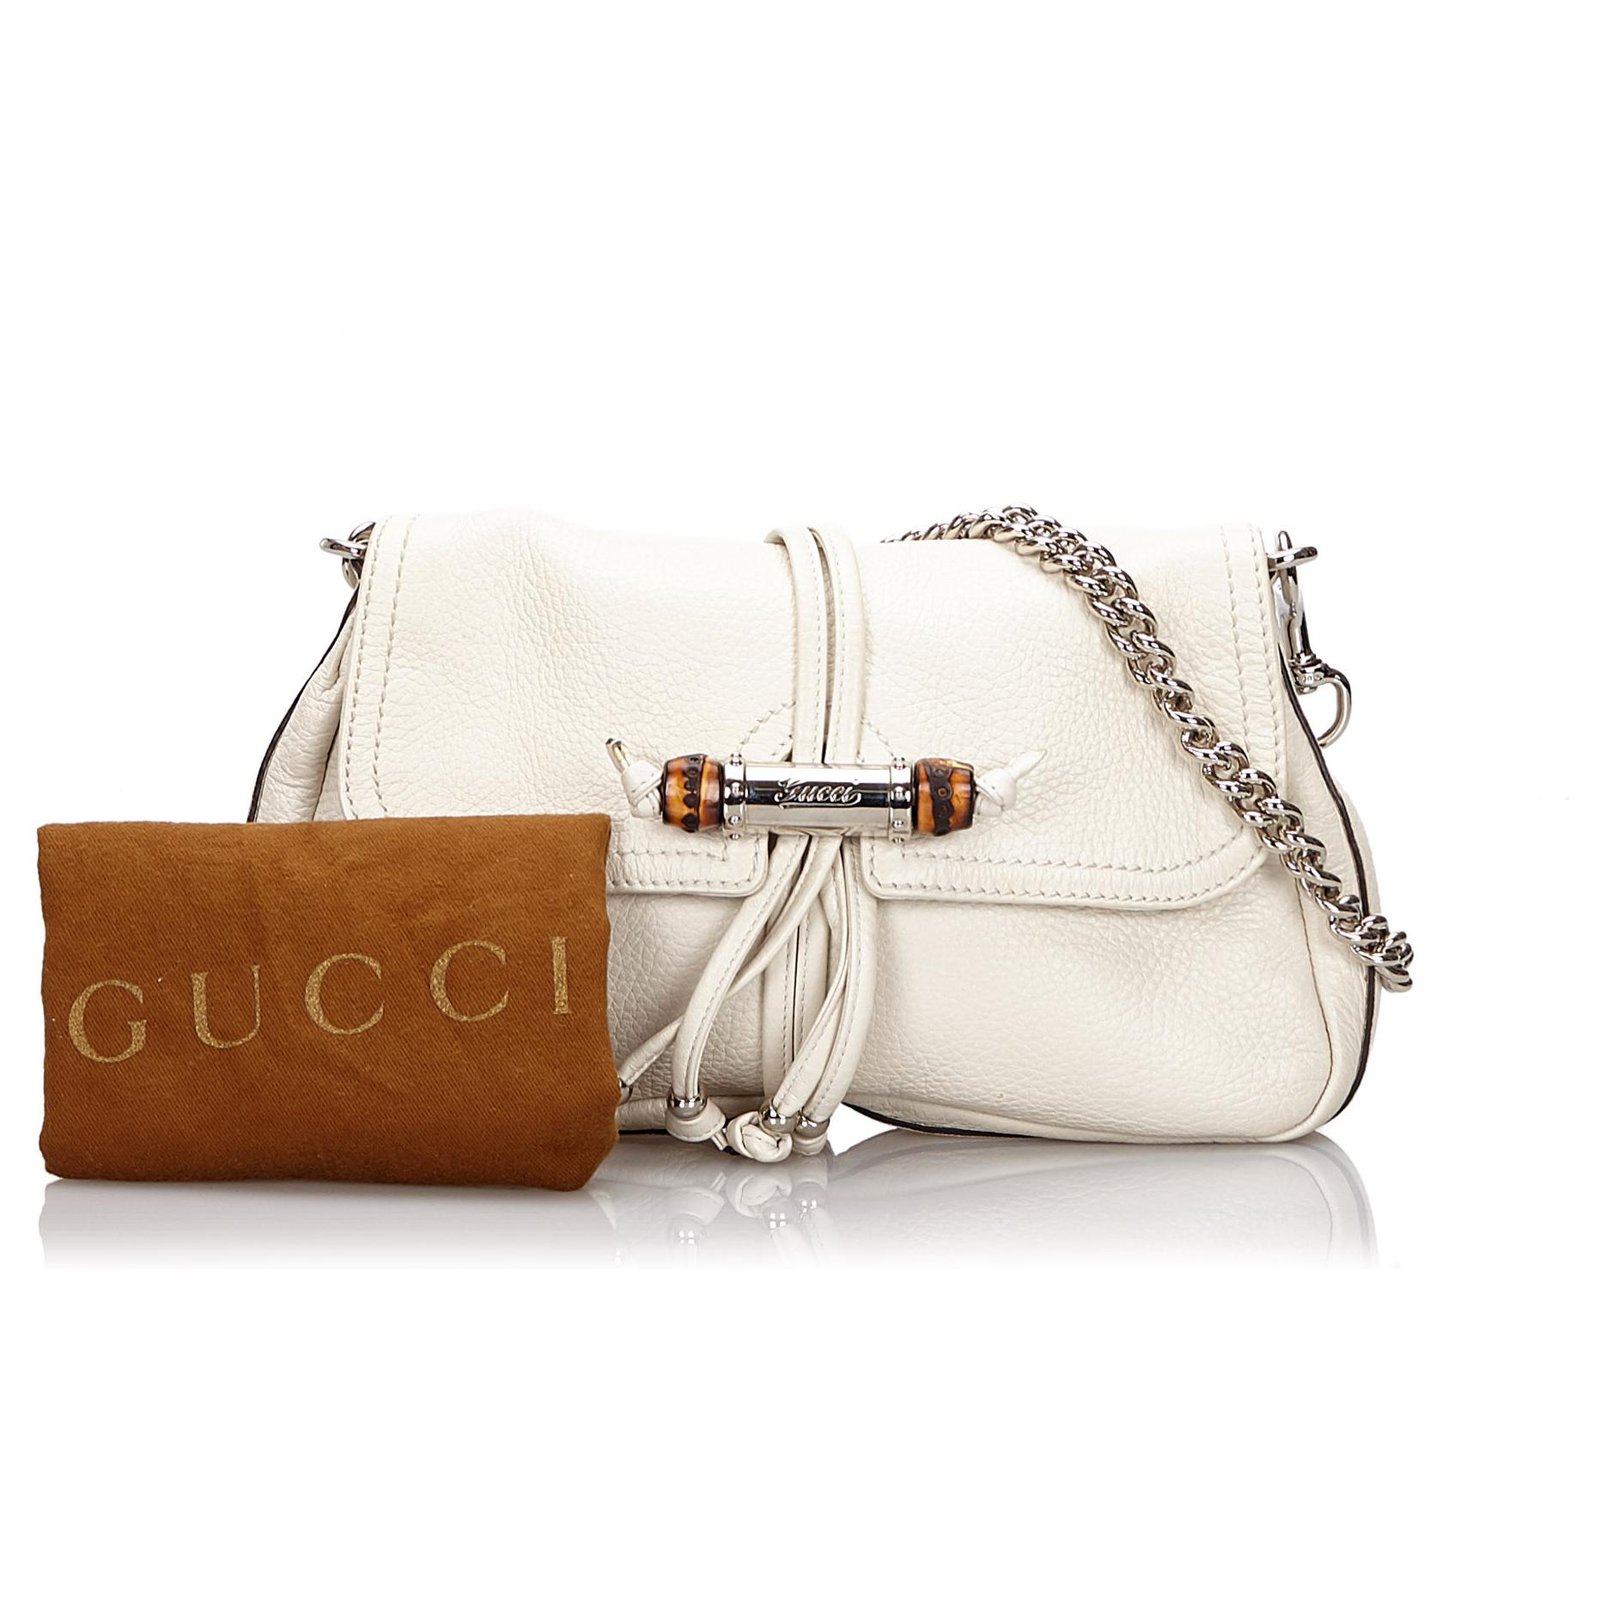 Gucci Bamboo Croisette Leather Bag